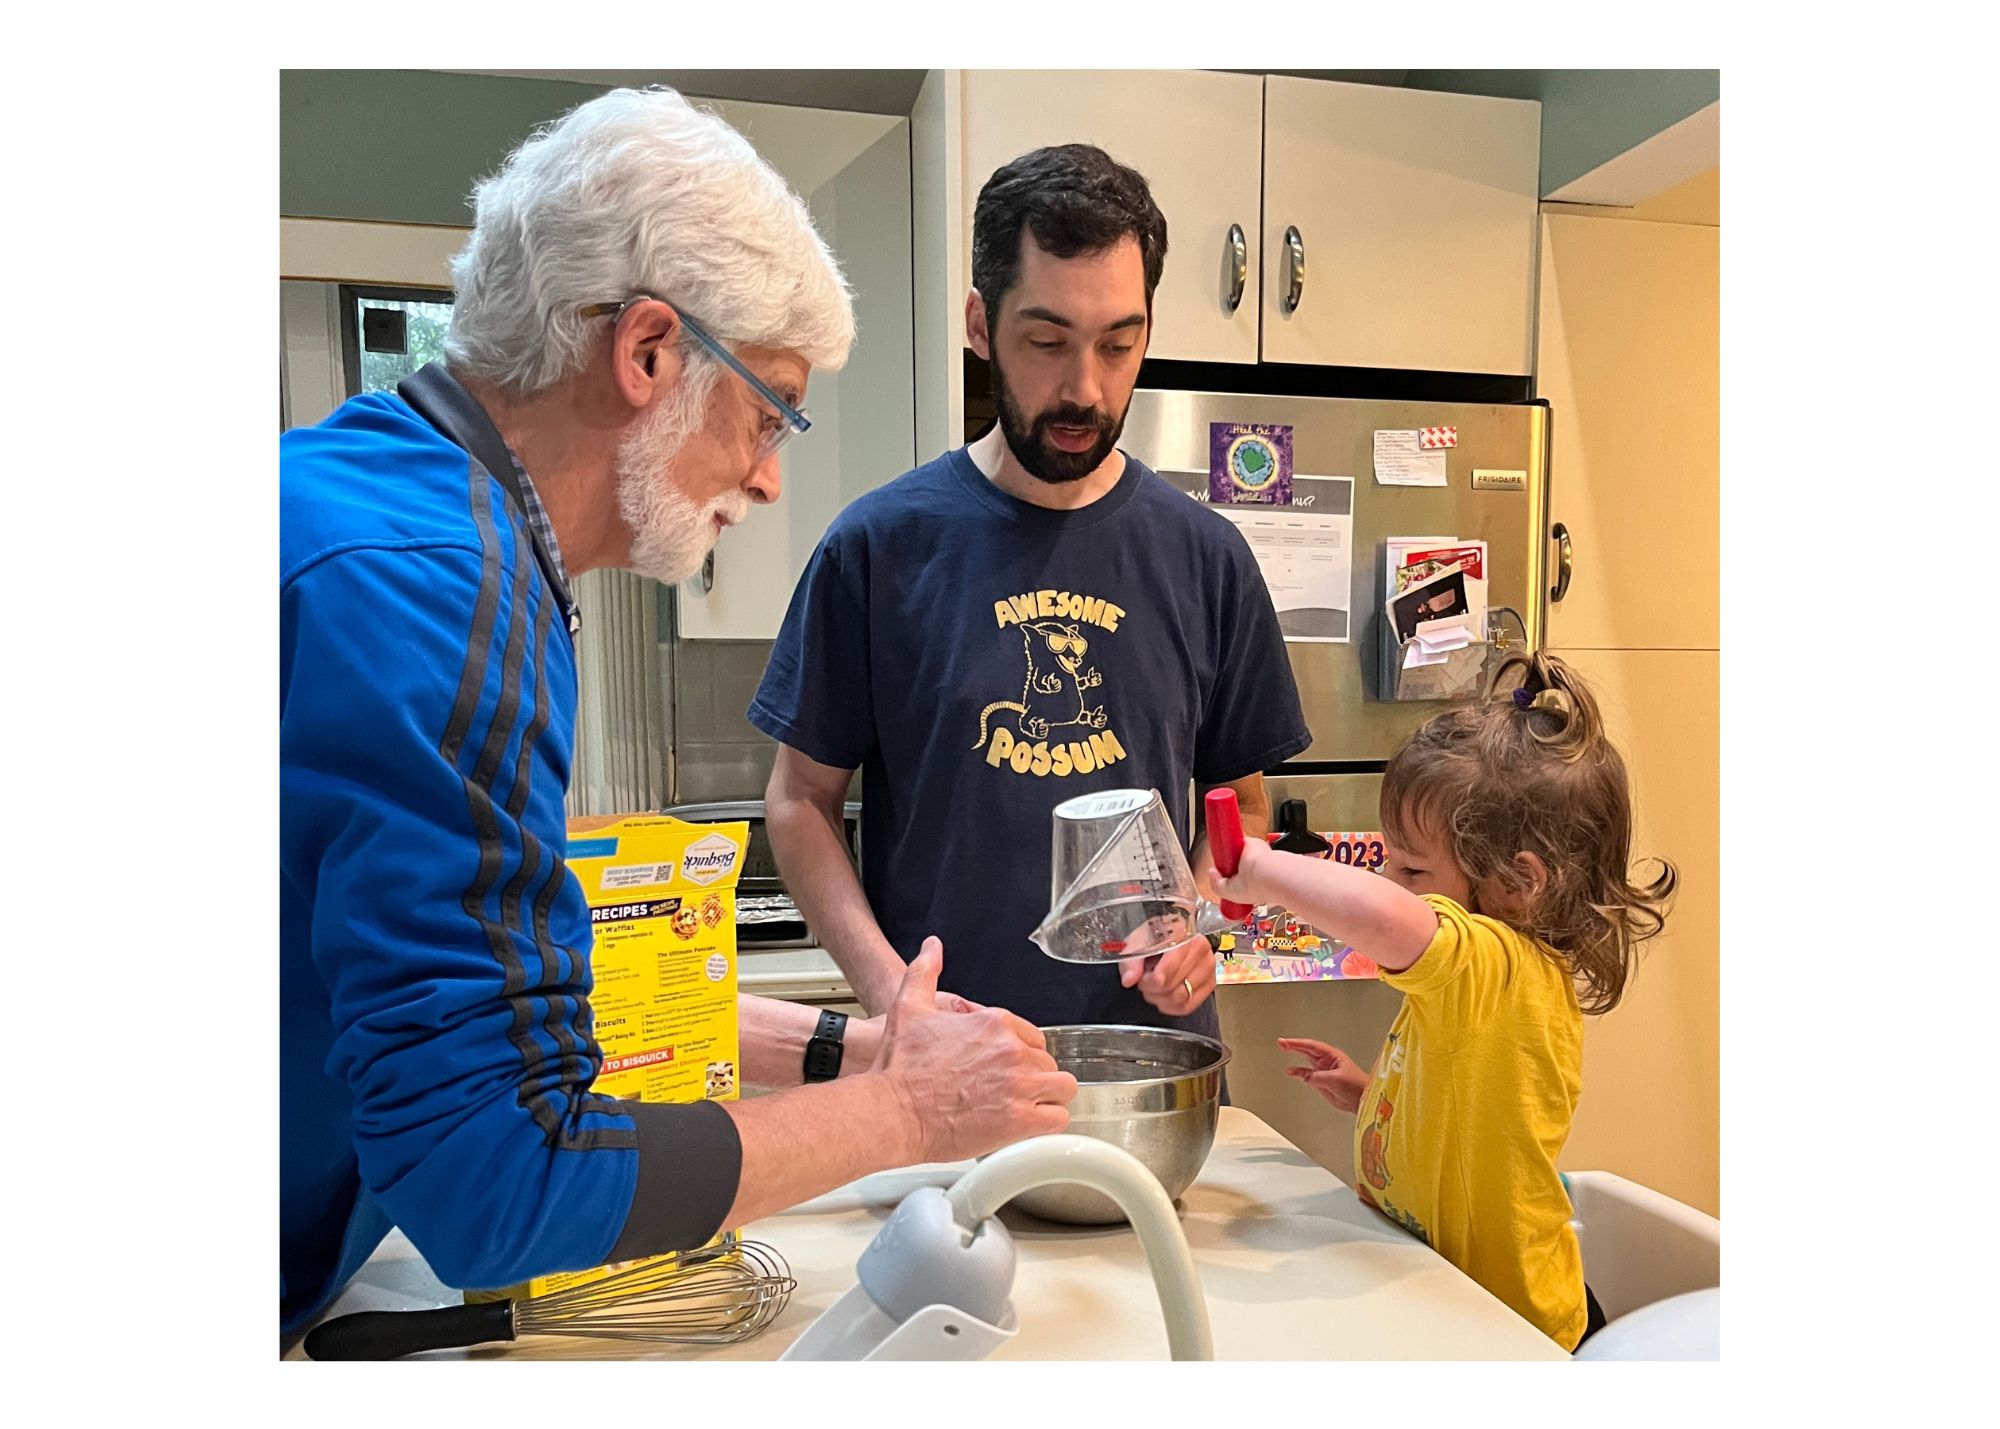 A man with white hair and blue shirt, a man with brown hair and beard wearing a black t-shirt, and a young girl with light brown hair wearing a yellow shirt work to stir pancake batter in a kitchen. 